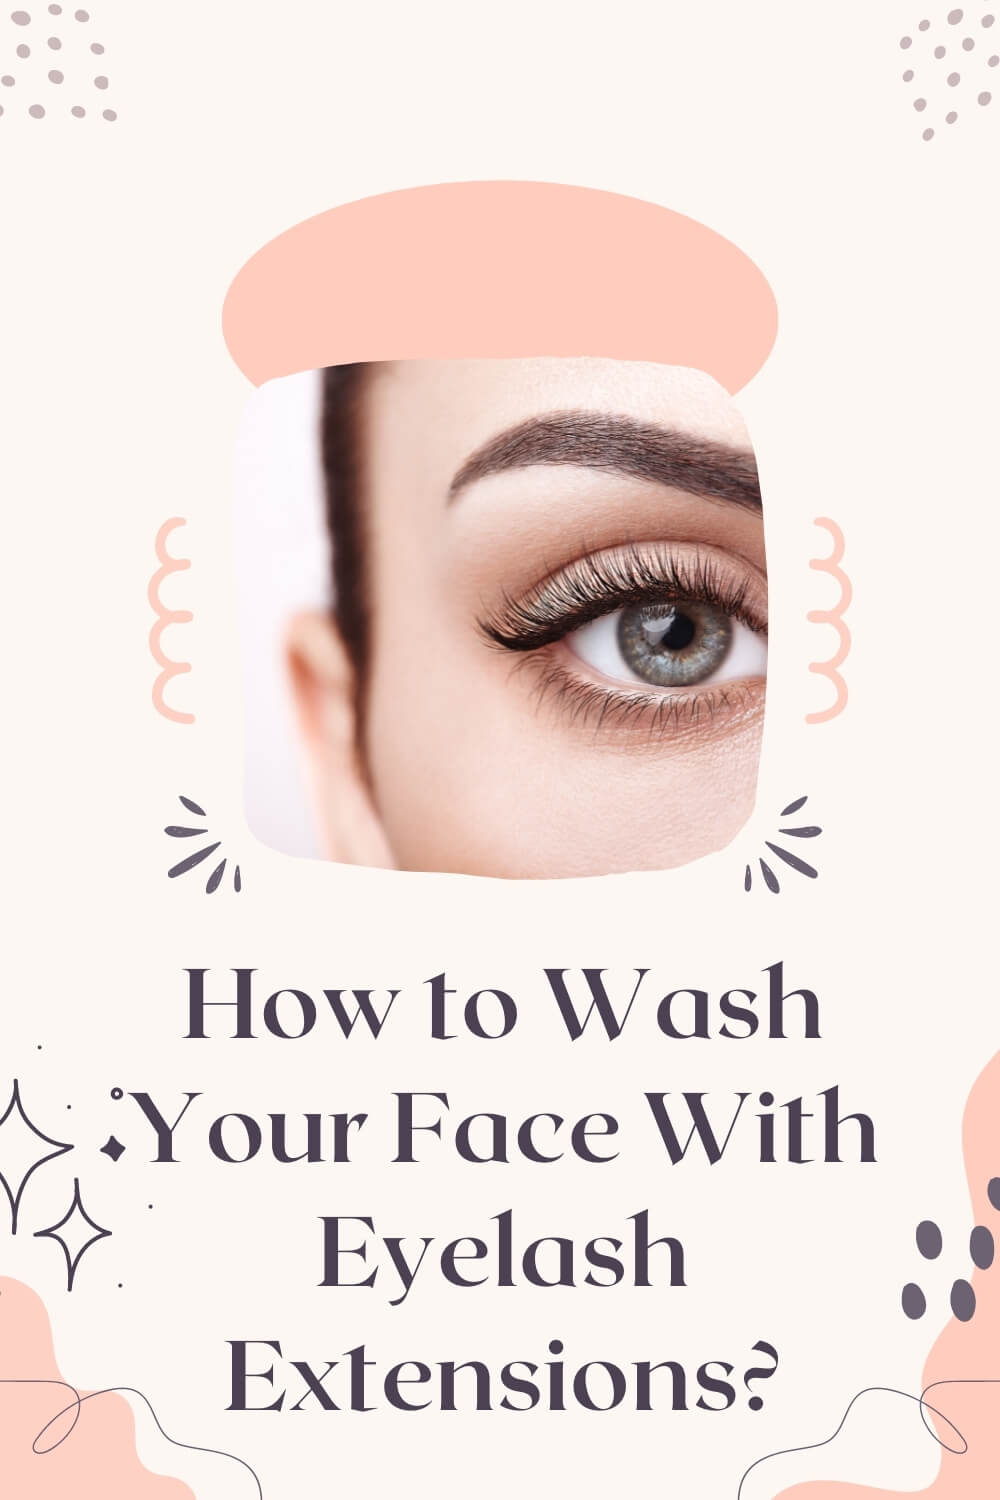 How to Wash Your Face With Eyelash Extensions